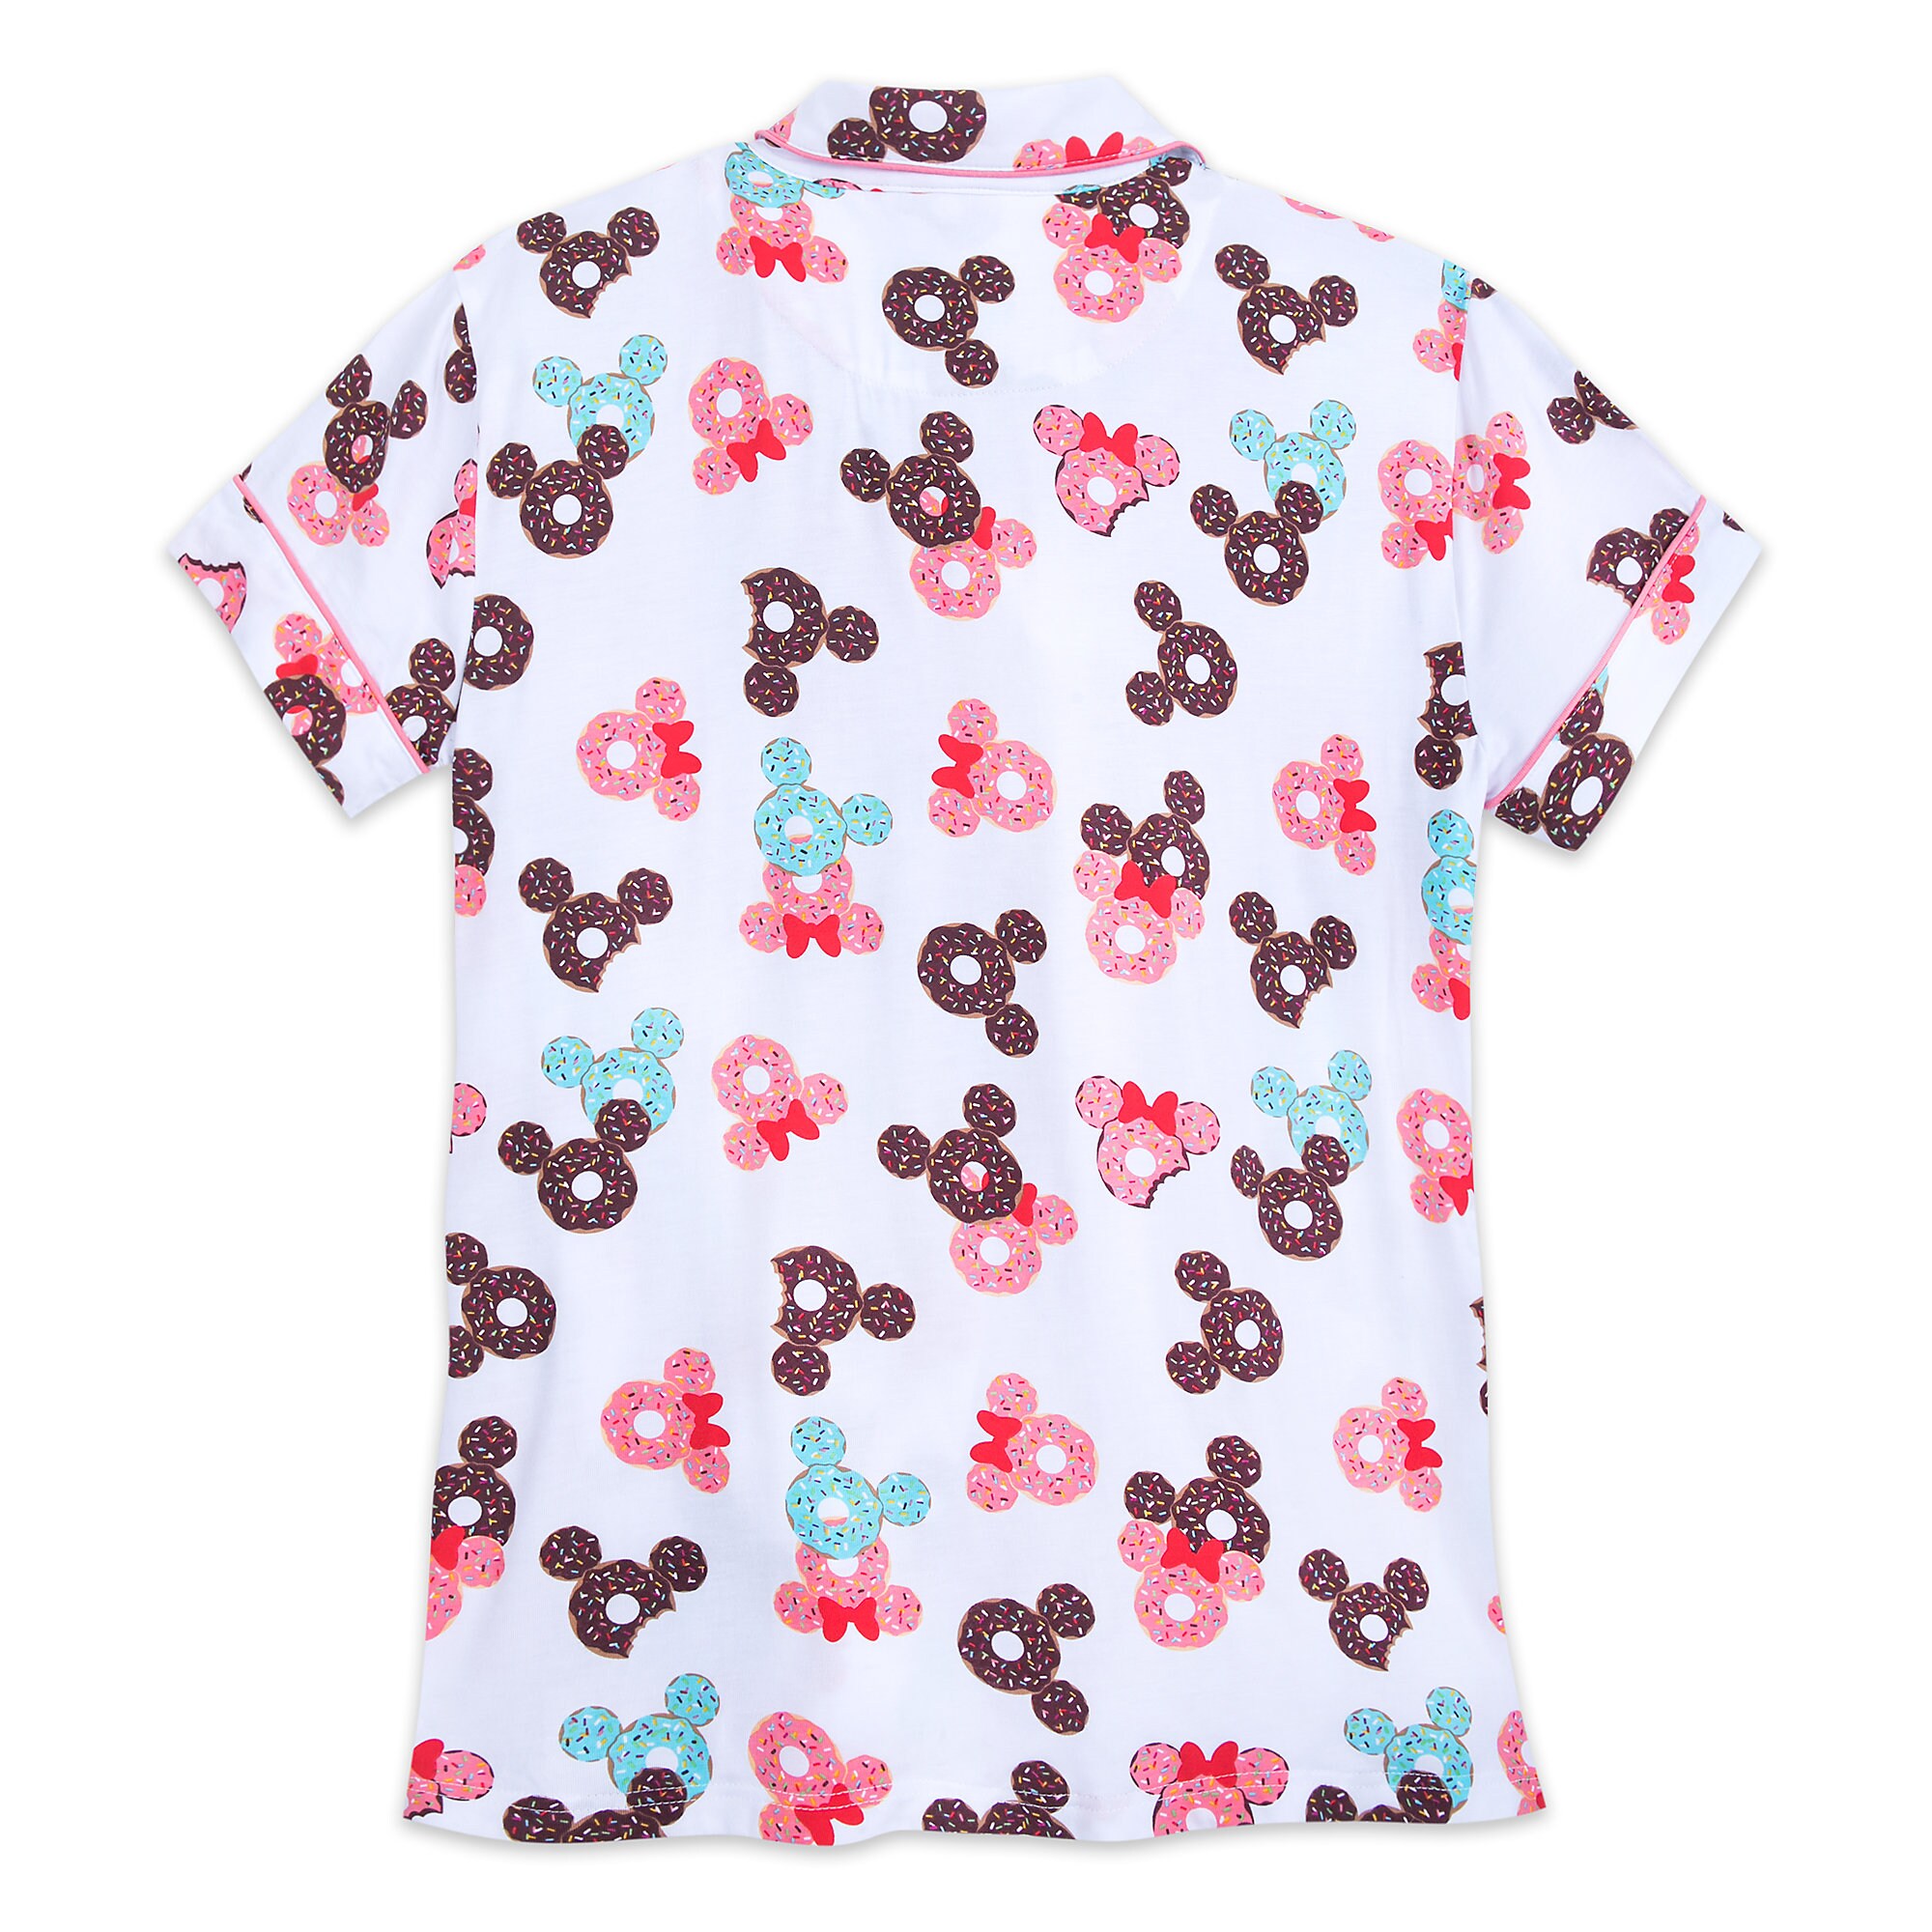 Mickey and Minnie Mouse Donut Pajama Set for Women is available online ...